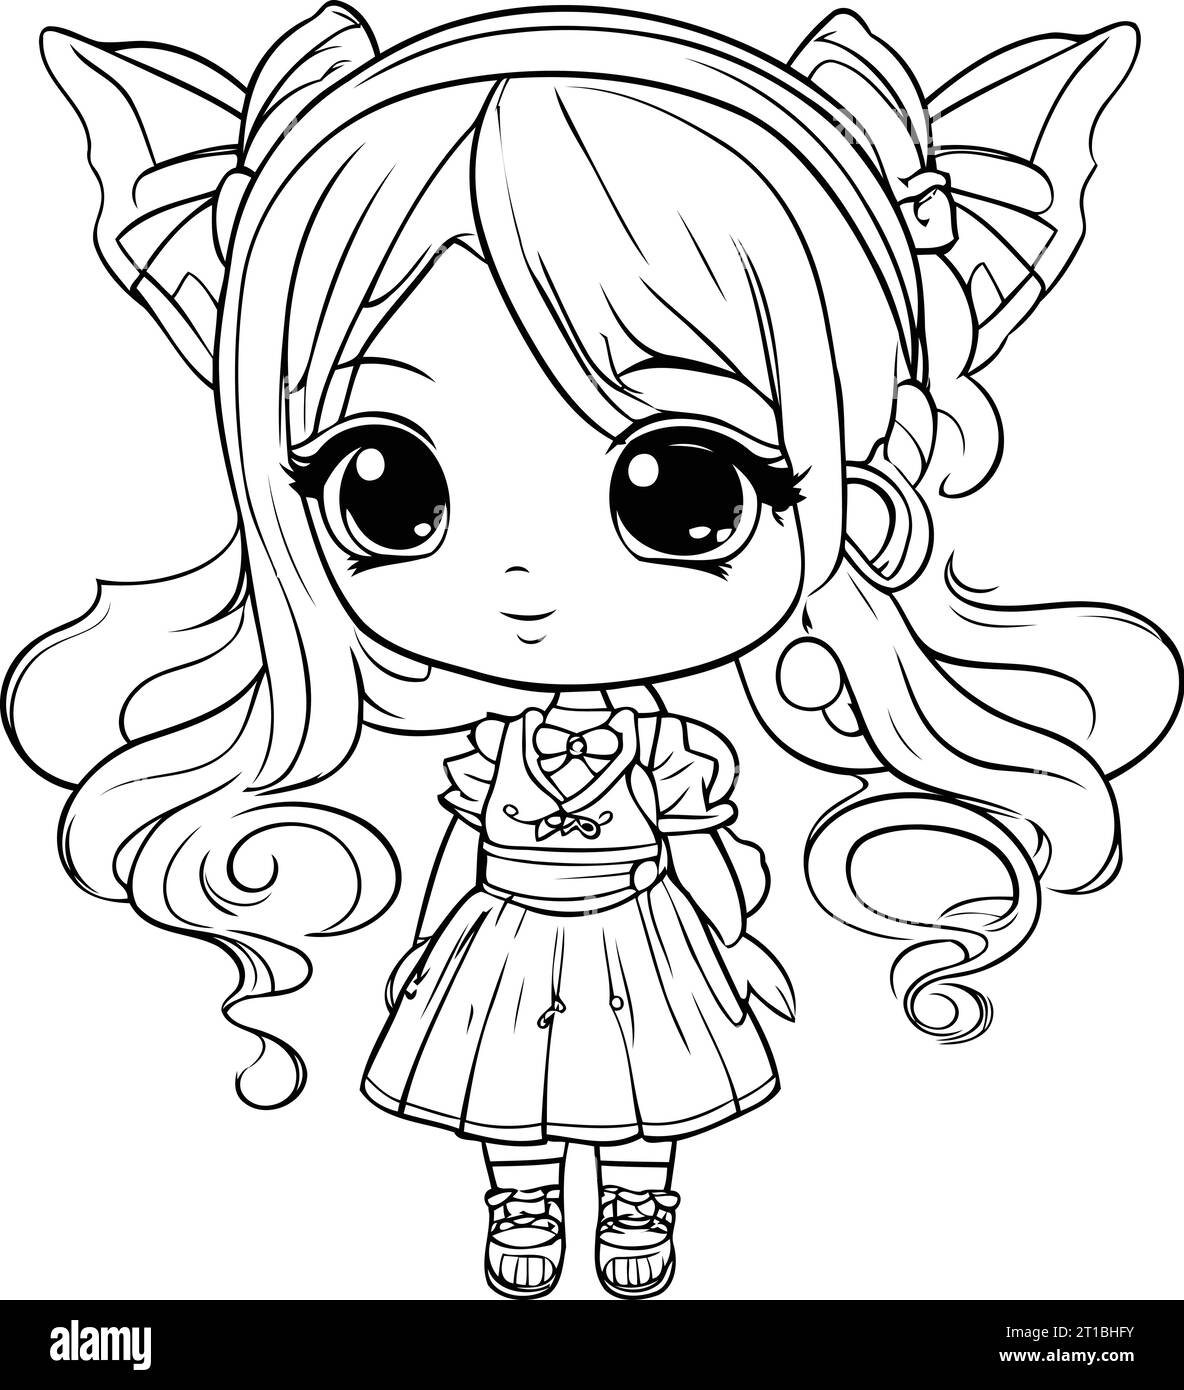 Cute cartoon girl in fairy costume. Vector illustration for coloring ...